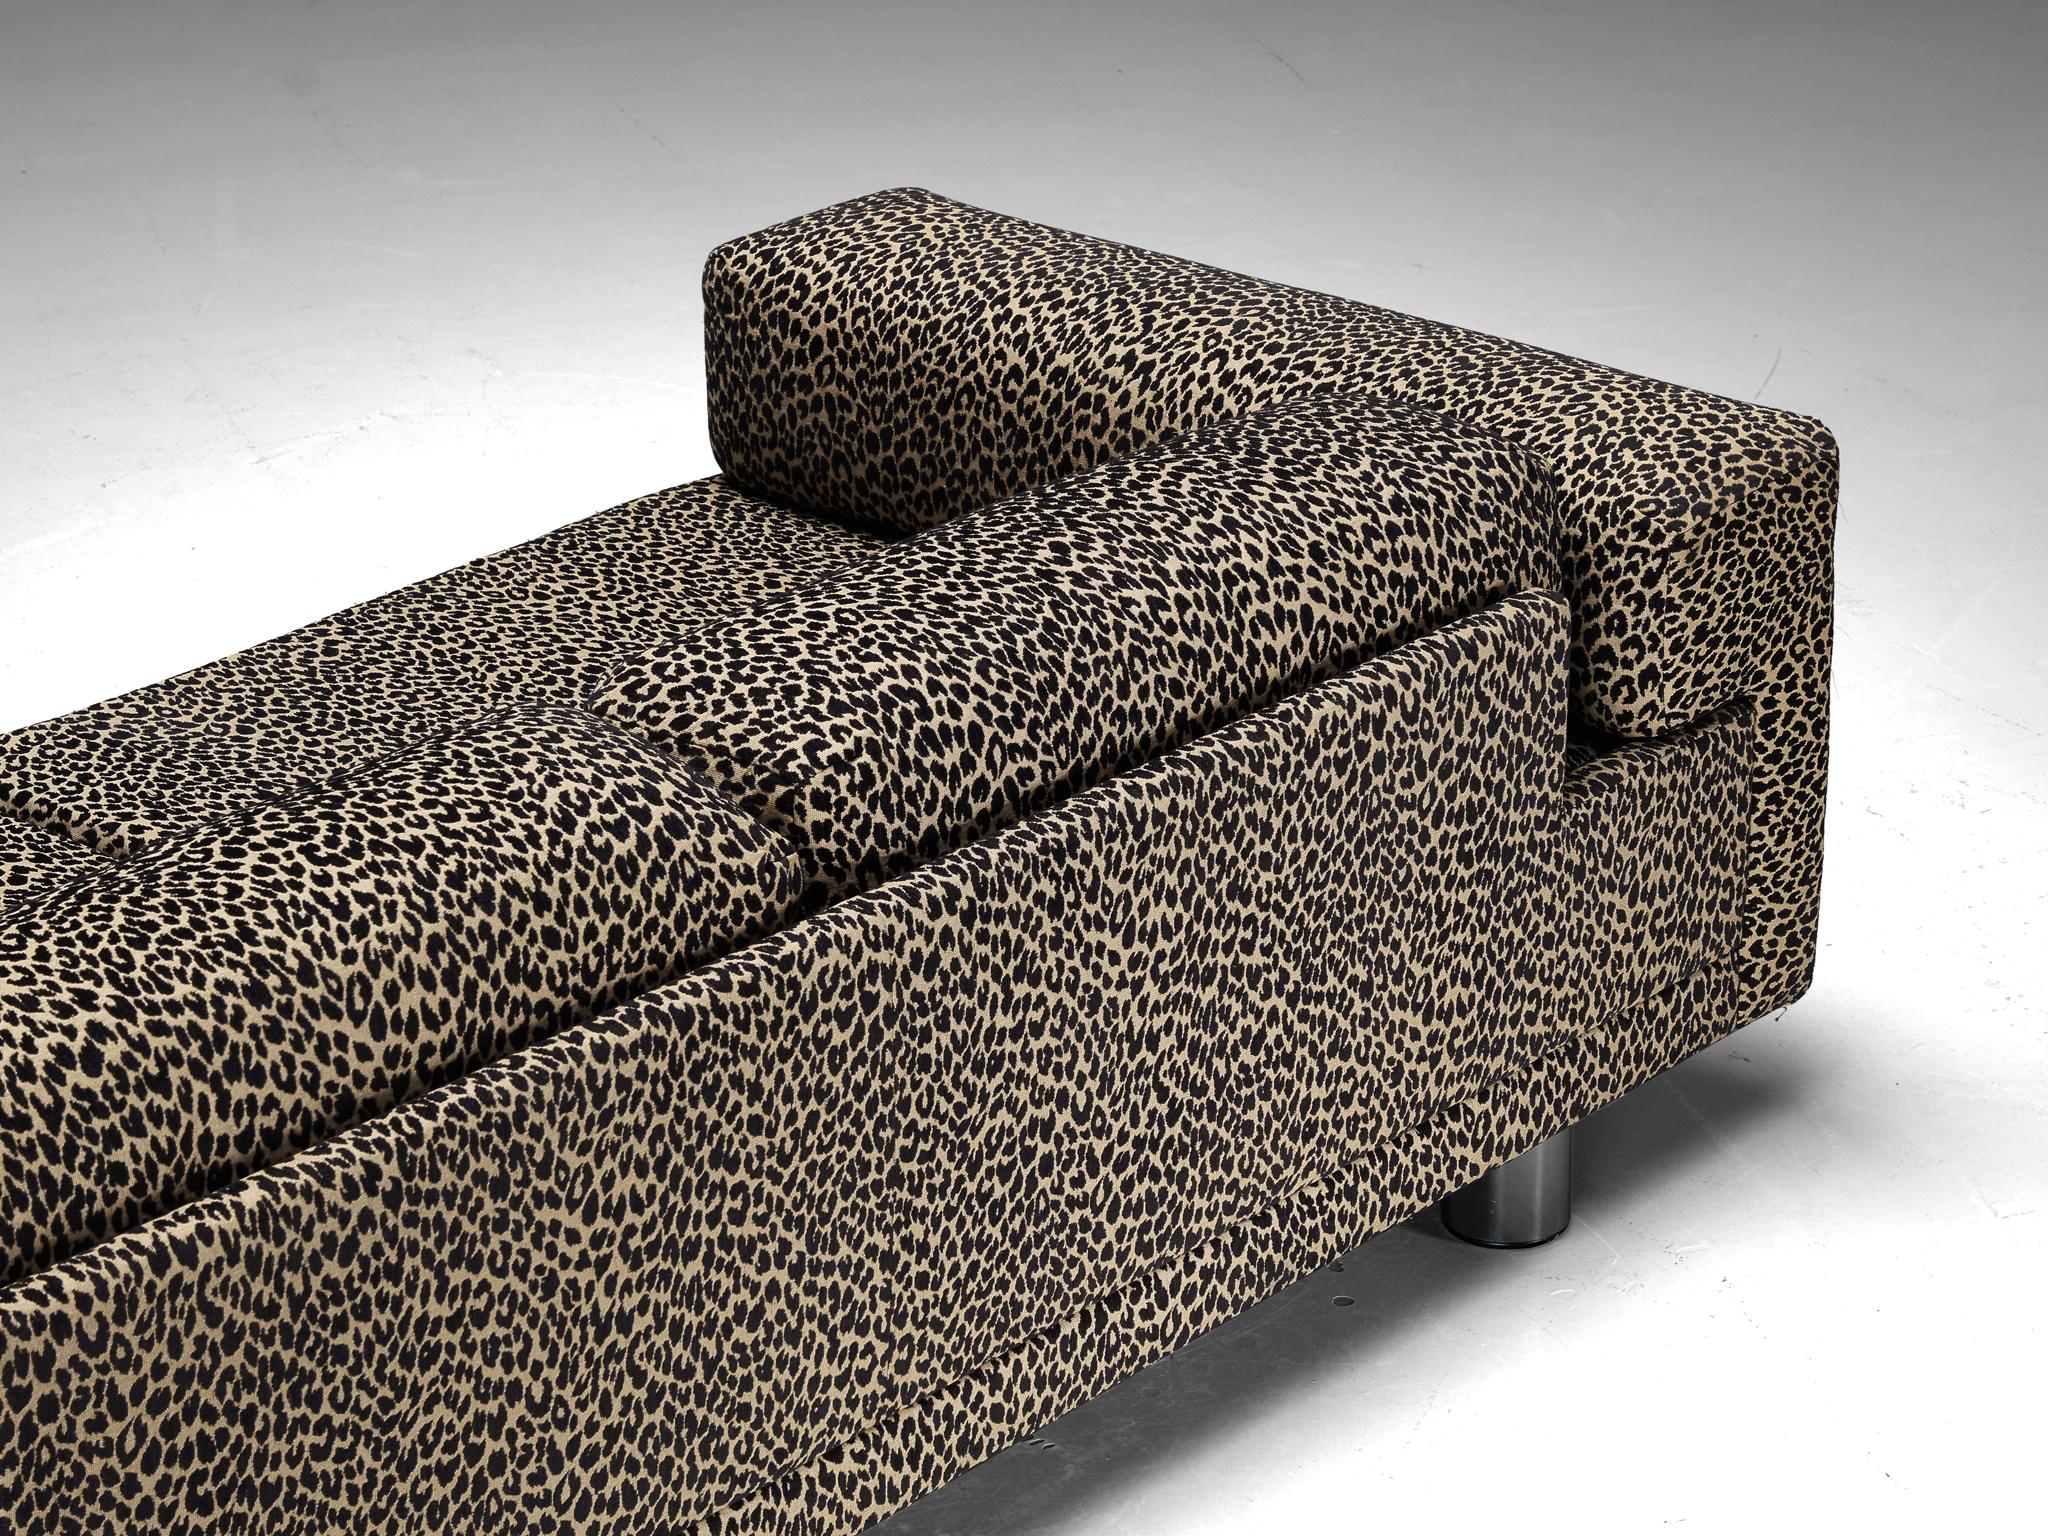 Howard Keith 'Diplomat' Sofa in Leopard Print Upholstery  For Sale 2